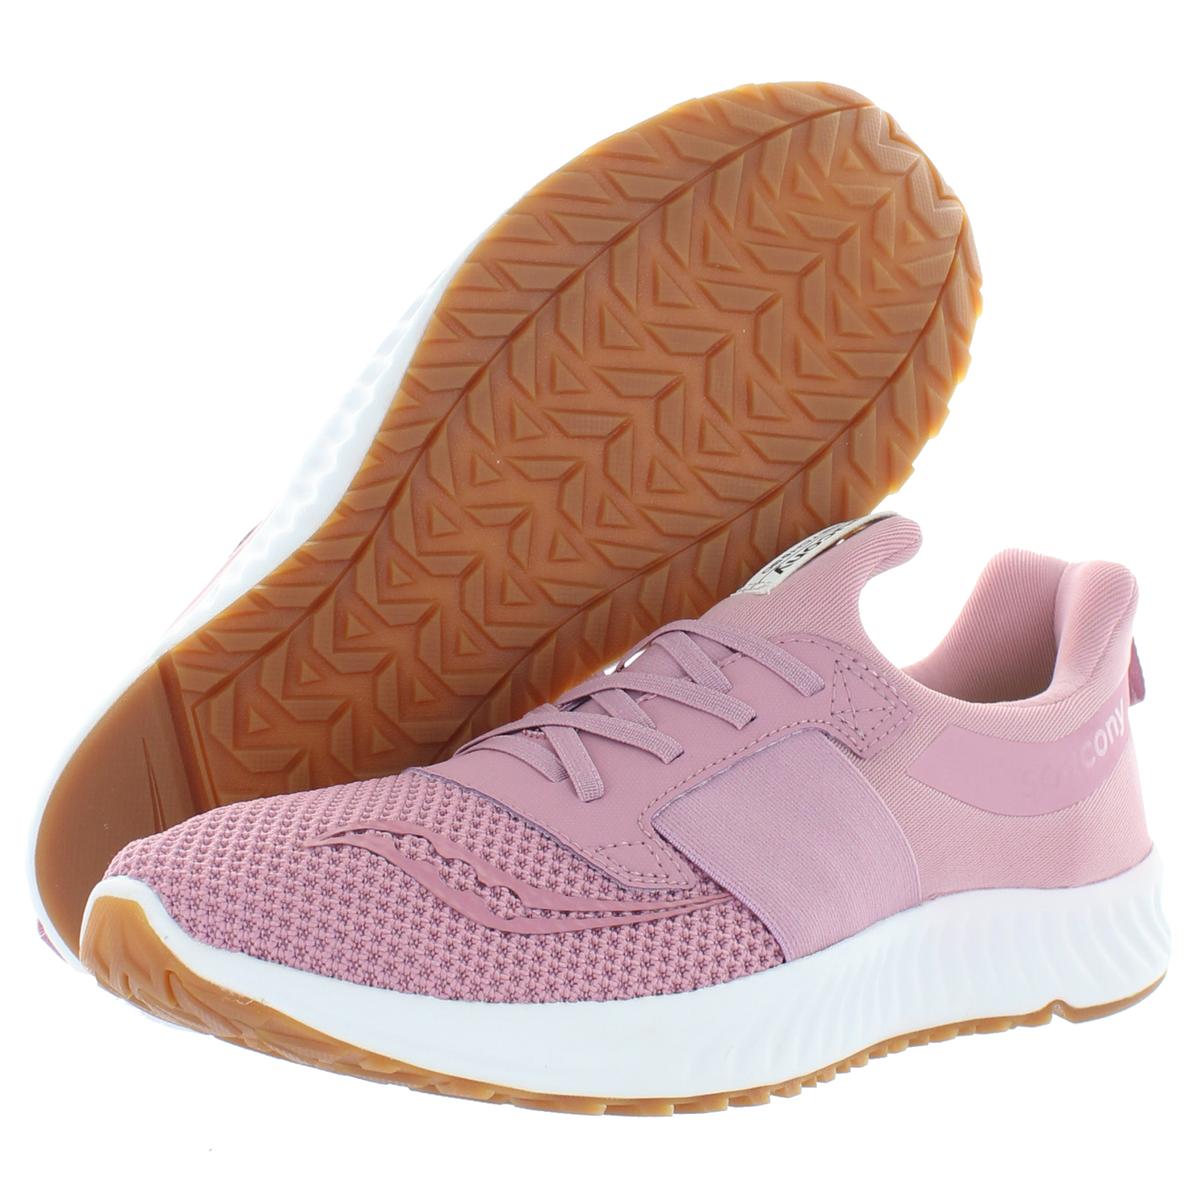 Saucony Womens Stretch & Go Breeze Memory Foam Slip On Sneakers Shoes ...